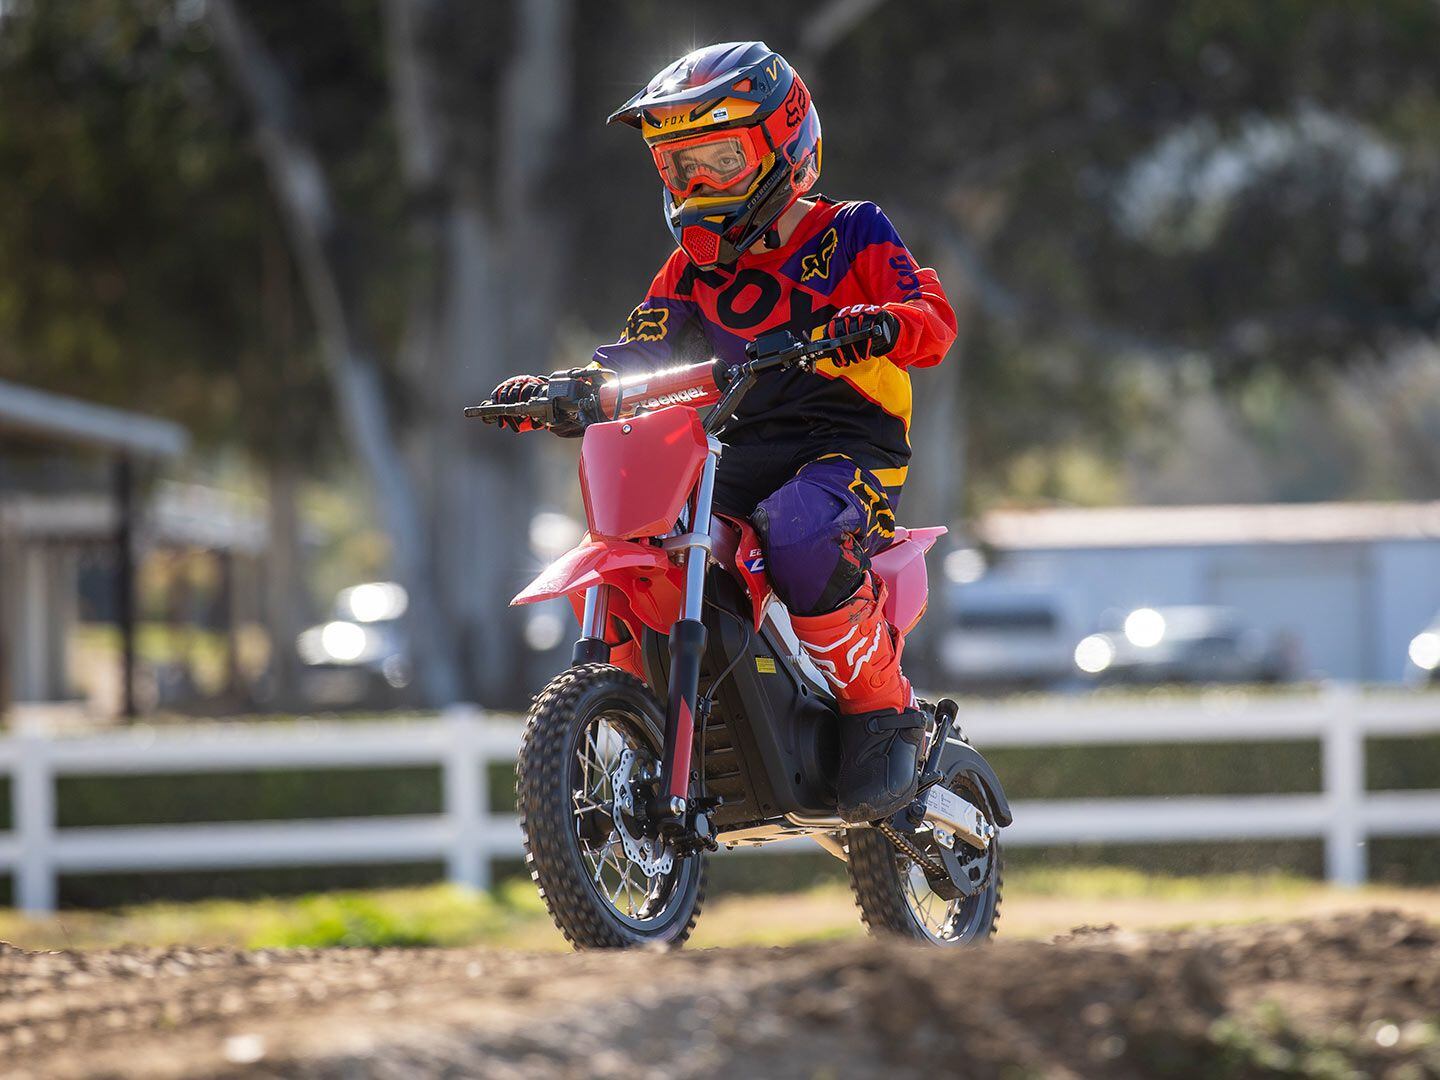 American Honda enters the youth electric motorcycle segment with the help of Greenger Powersports as an officially licensed product.